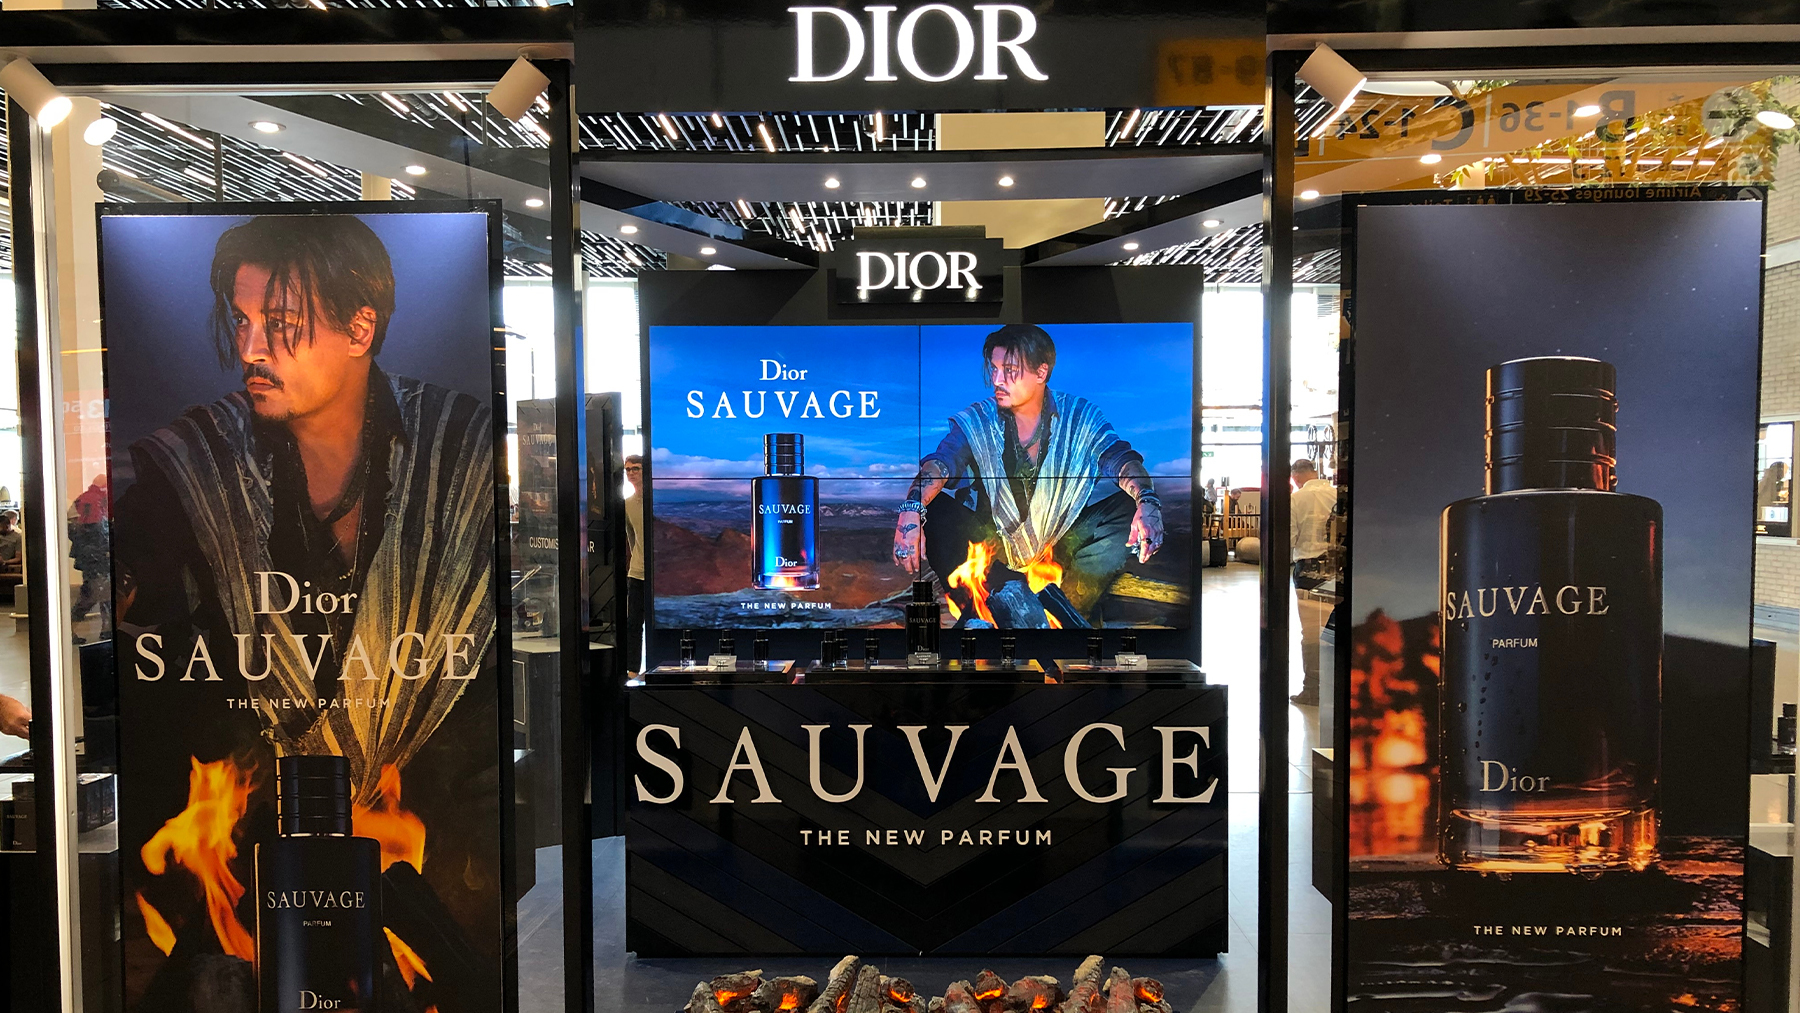 Dior Sauvage ad with Johnny Depp criticized for using Native American  images  The Washington Post